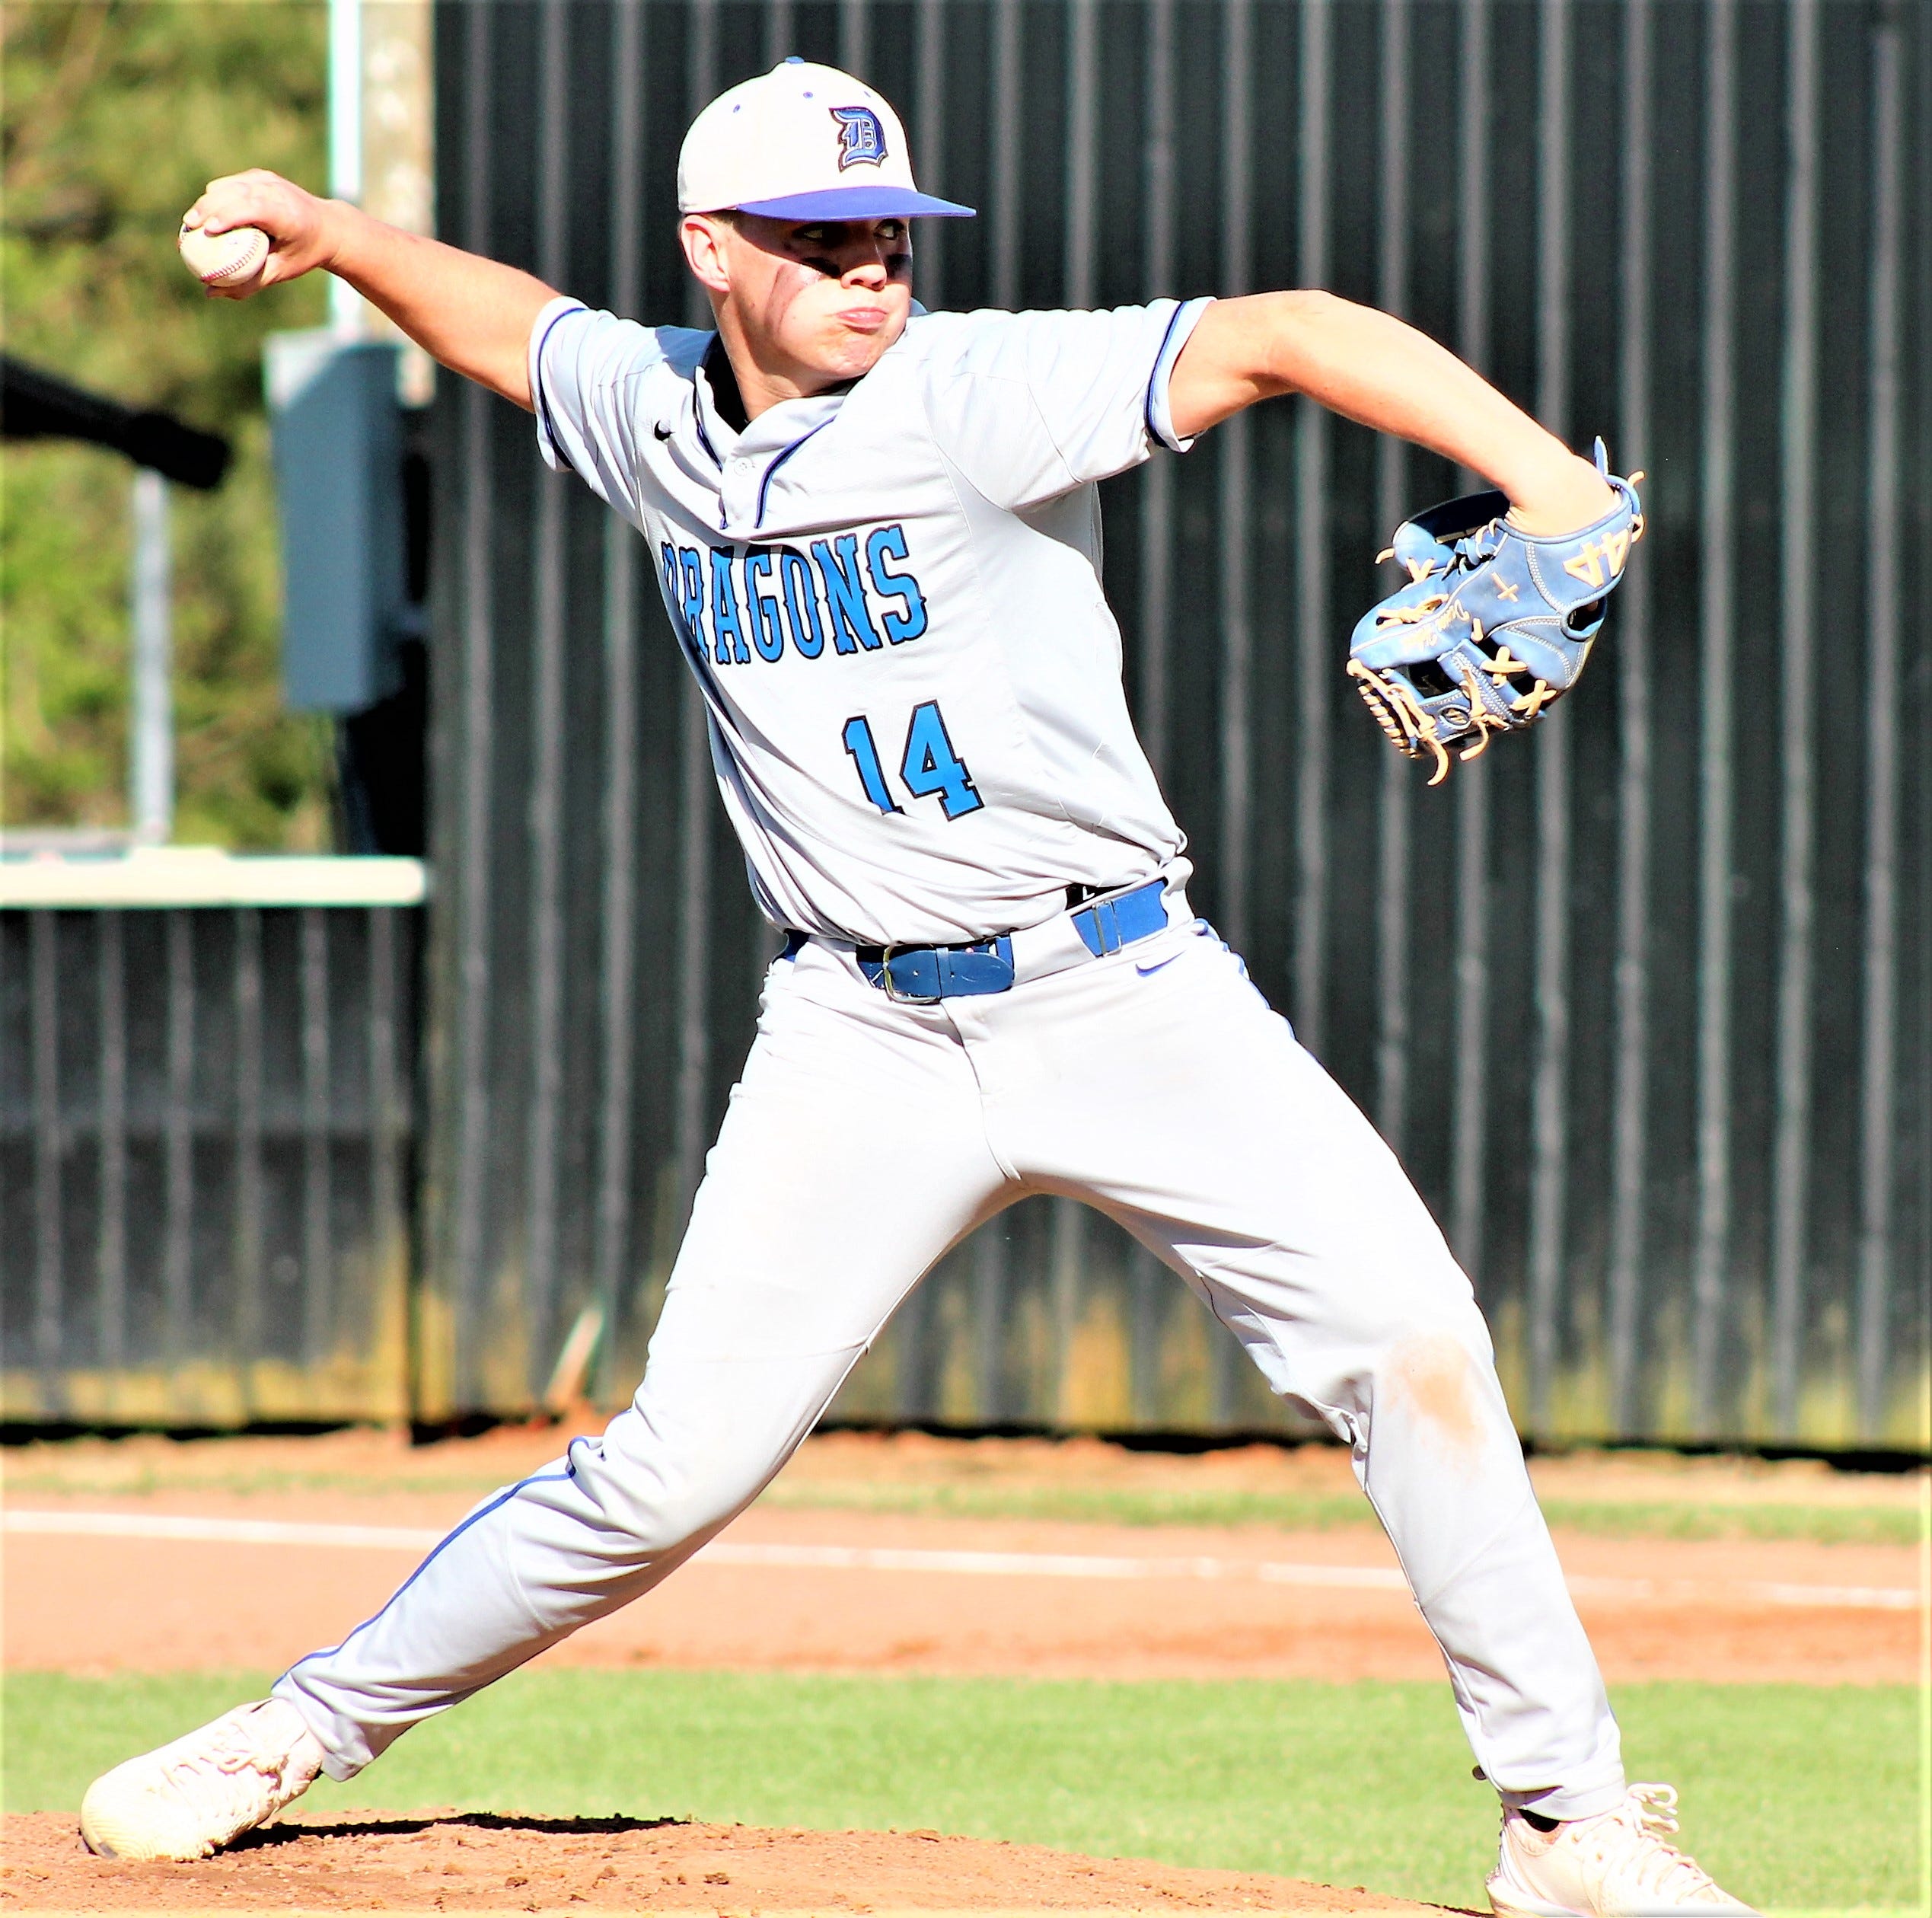 DeRidder starter Dawson Hebert had a stellar outing on Thursday with 11 strikeouts, tossing a four-hitter in a win over Leesville.